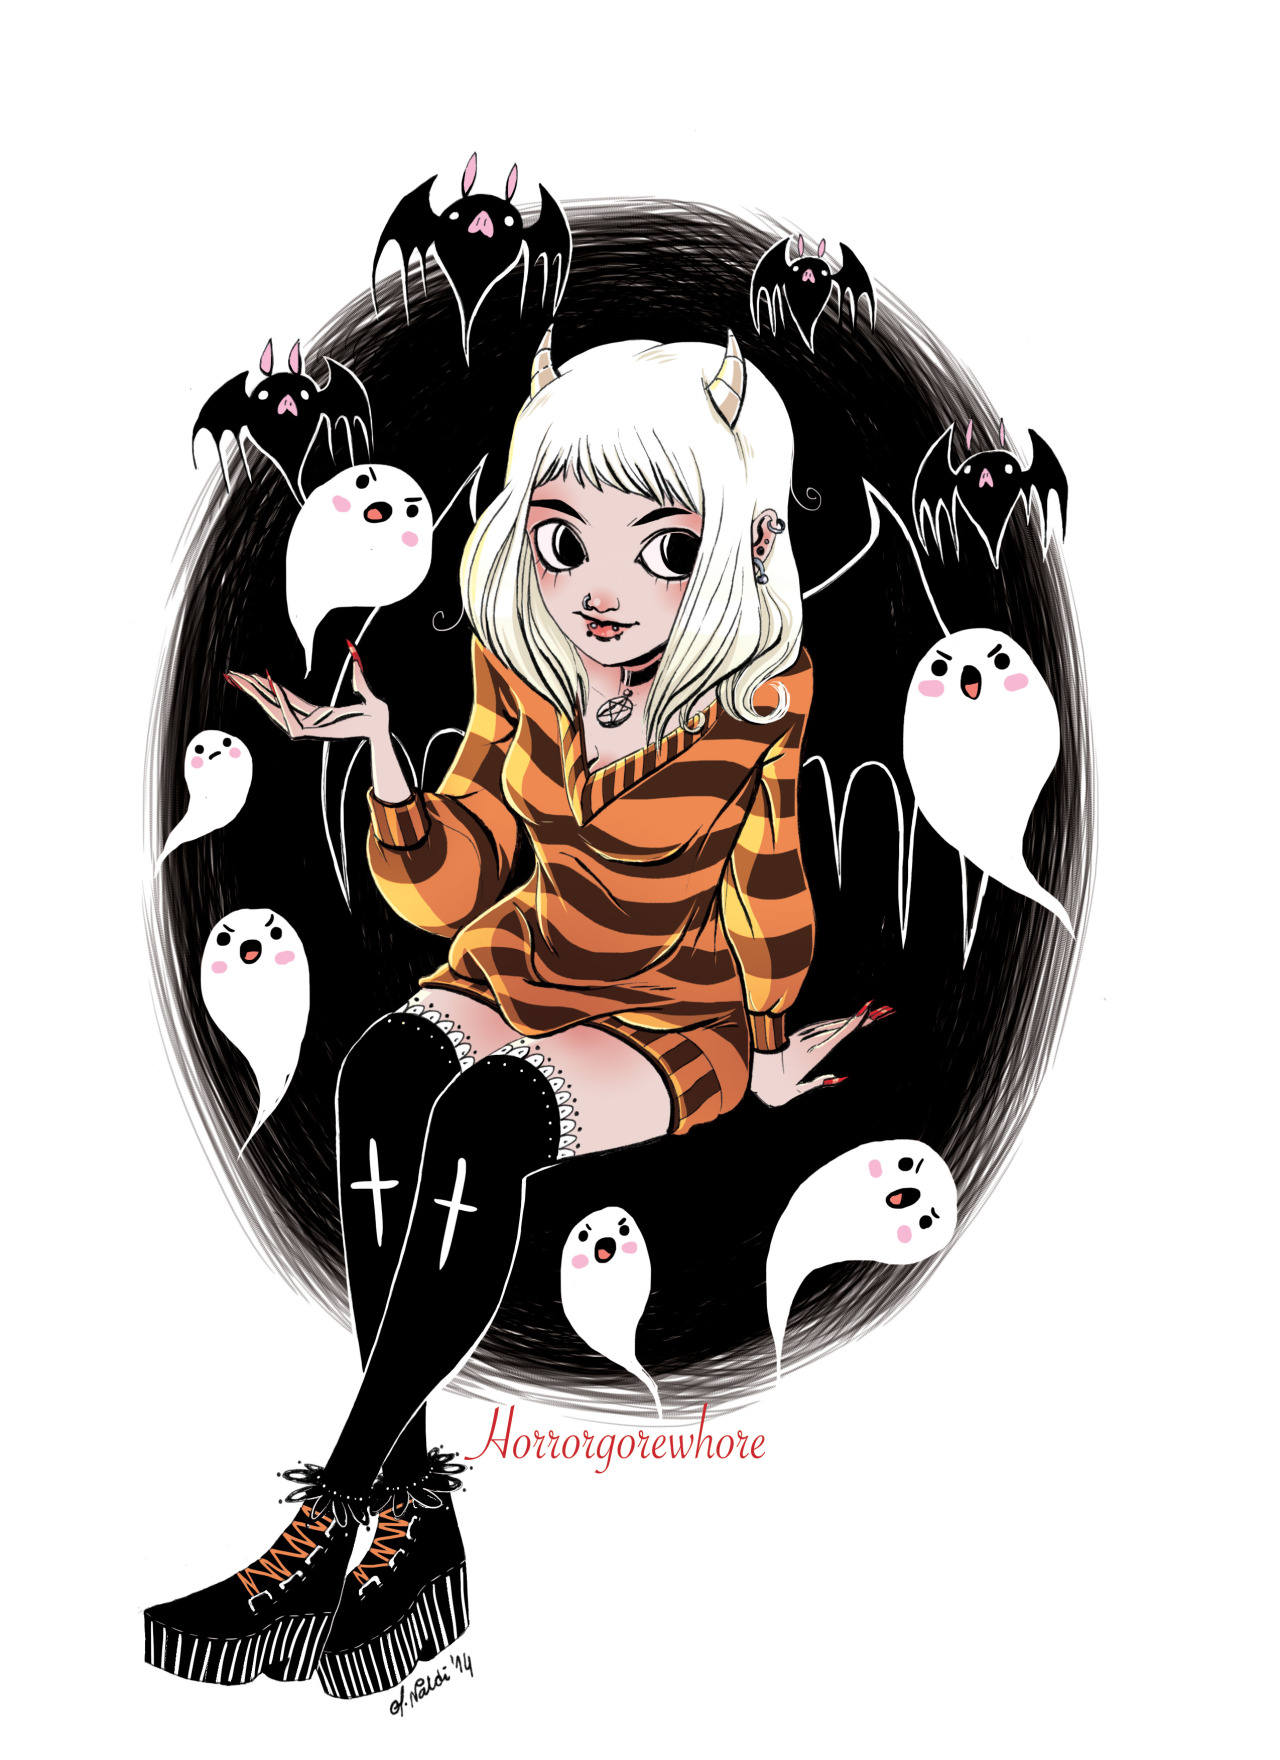 horrorgorewhore:I have never felt more adorable. This spooky adorable drawing of